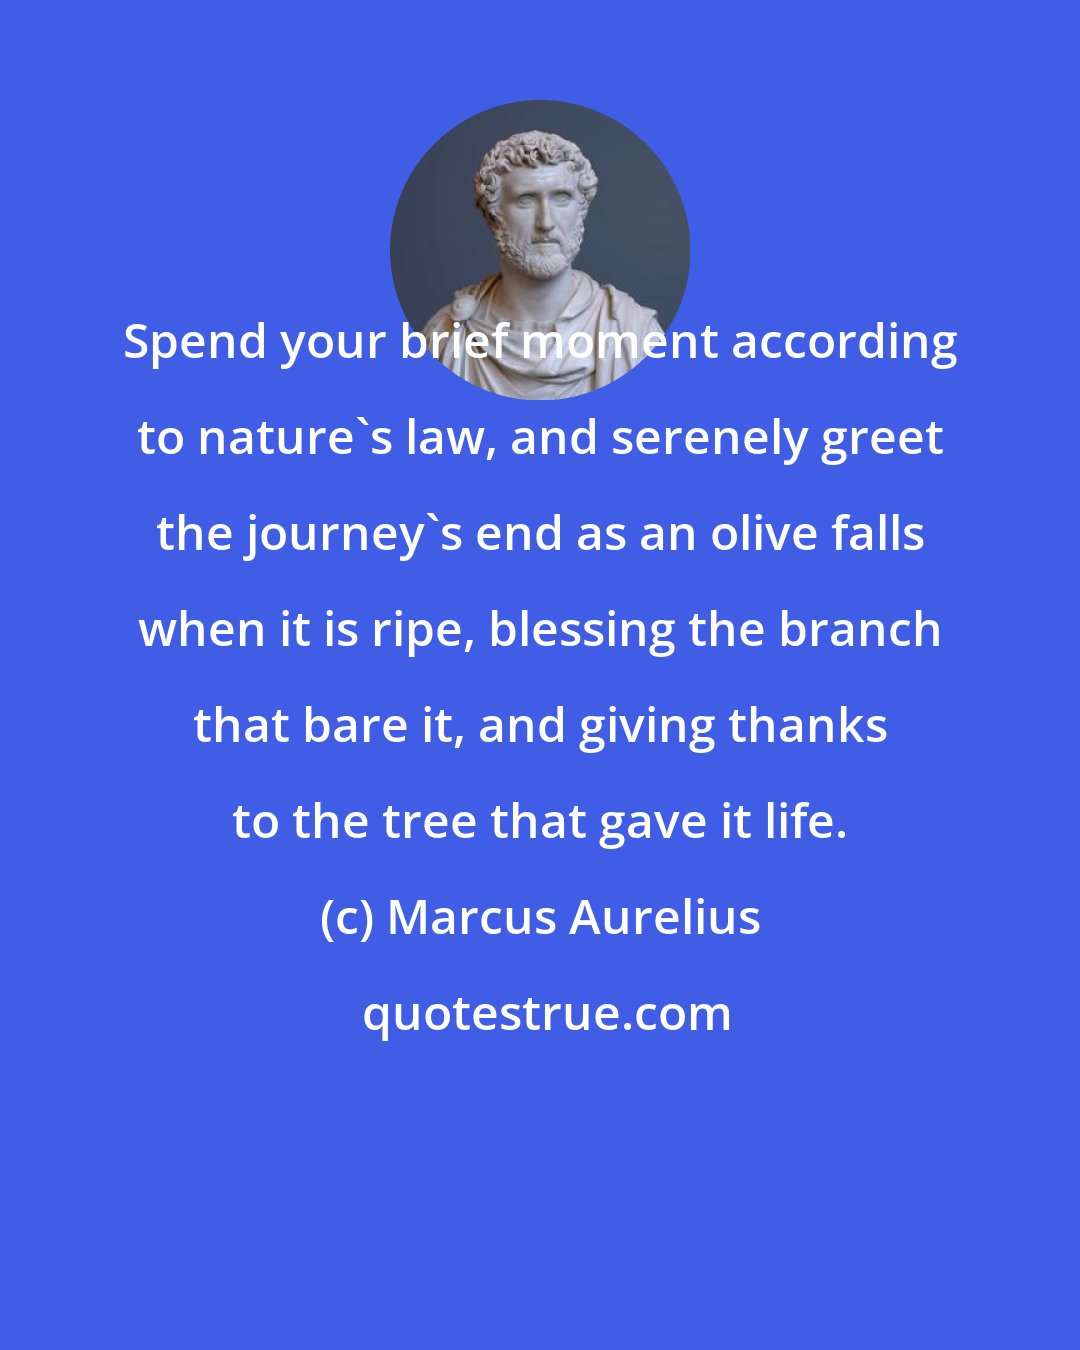 Marcus Aurelius: Spend your brief moment according to nature's law, and serenely greet the journey's end as an olive falls when it is ripe, blessing the branch that bare it, and giving thanks to the tree that gave it life.